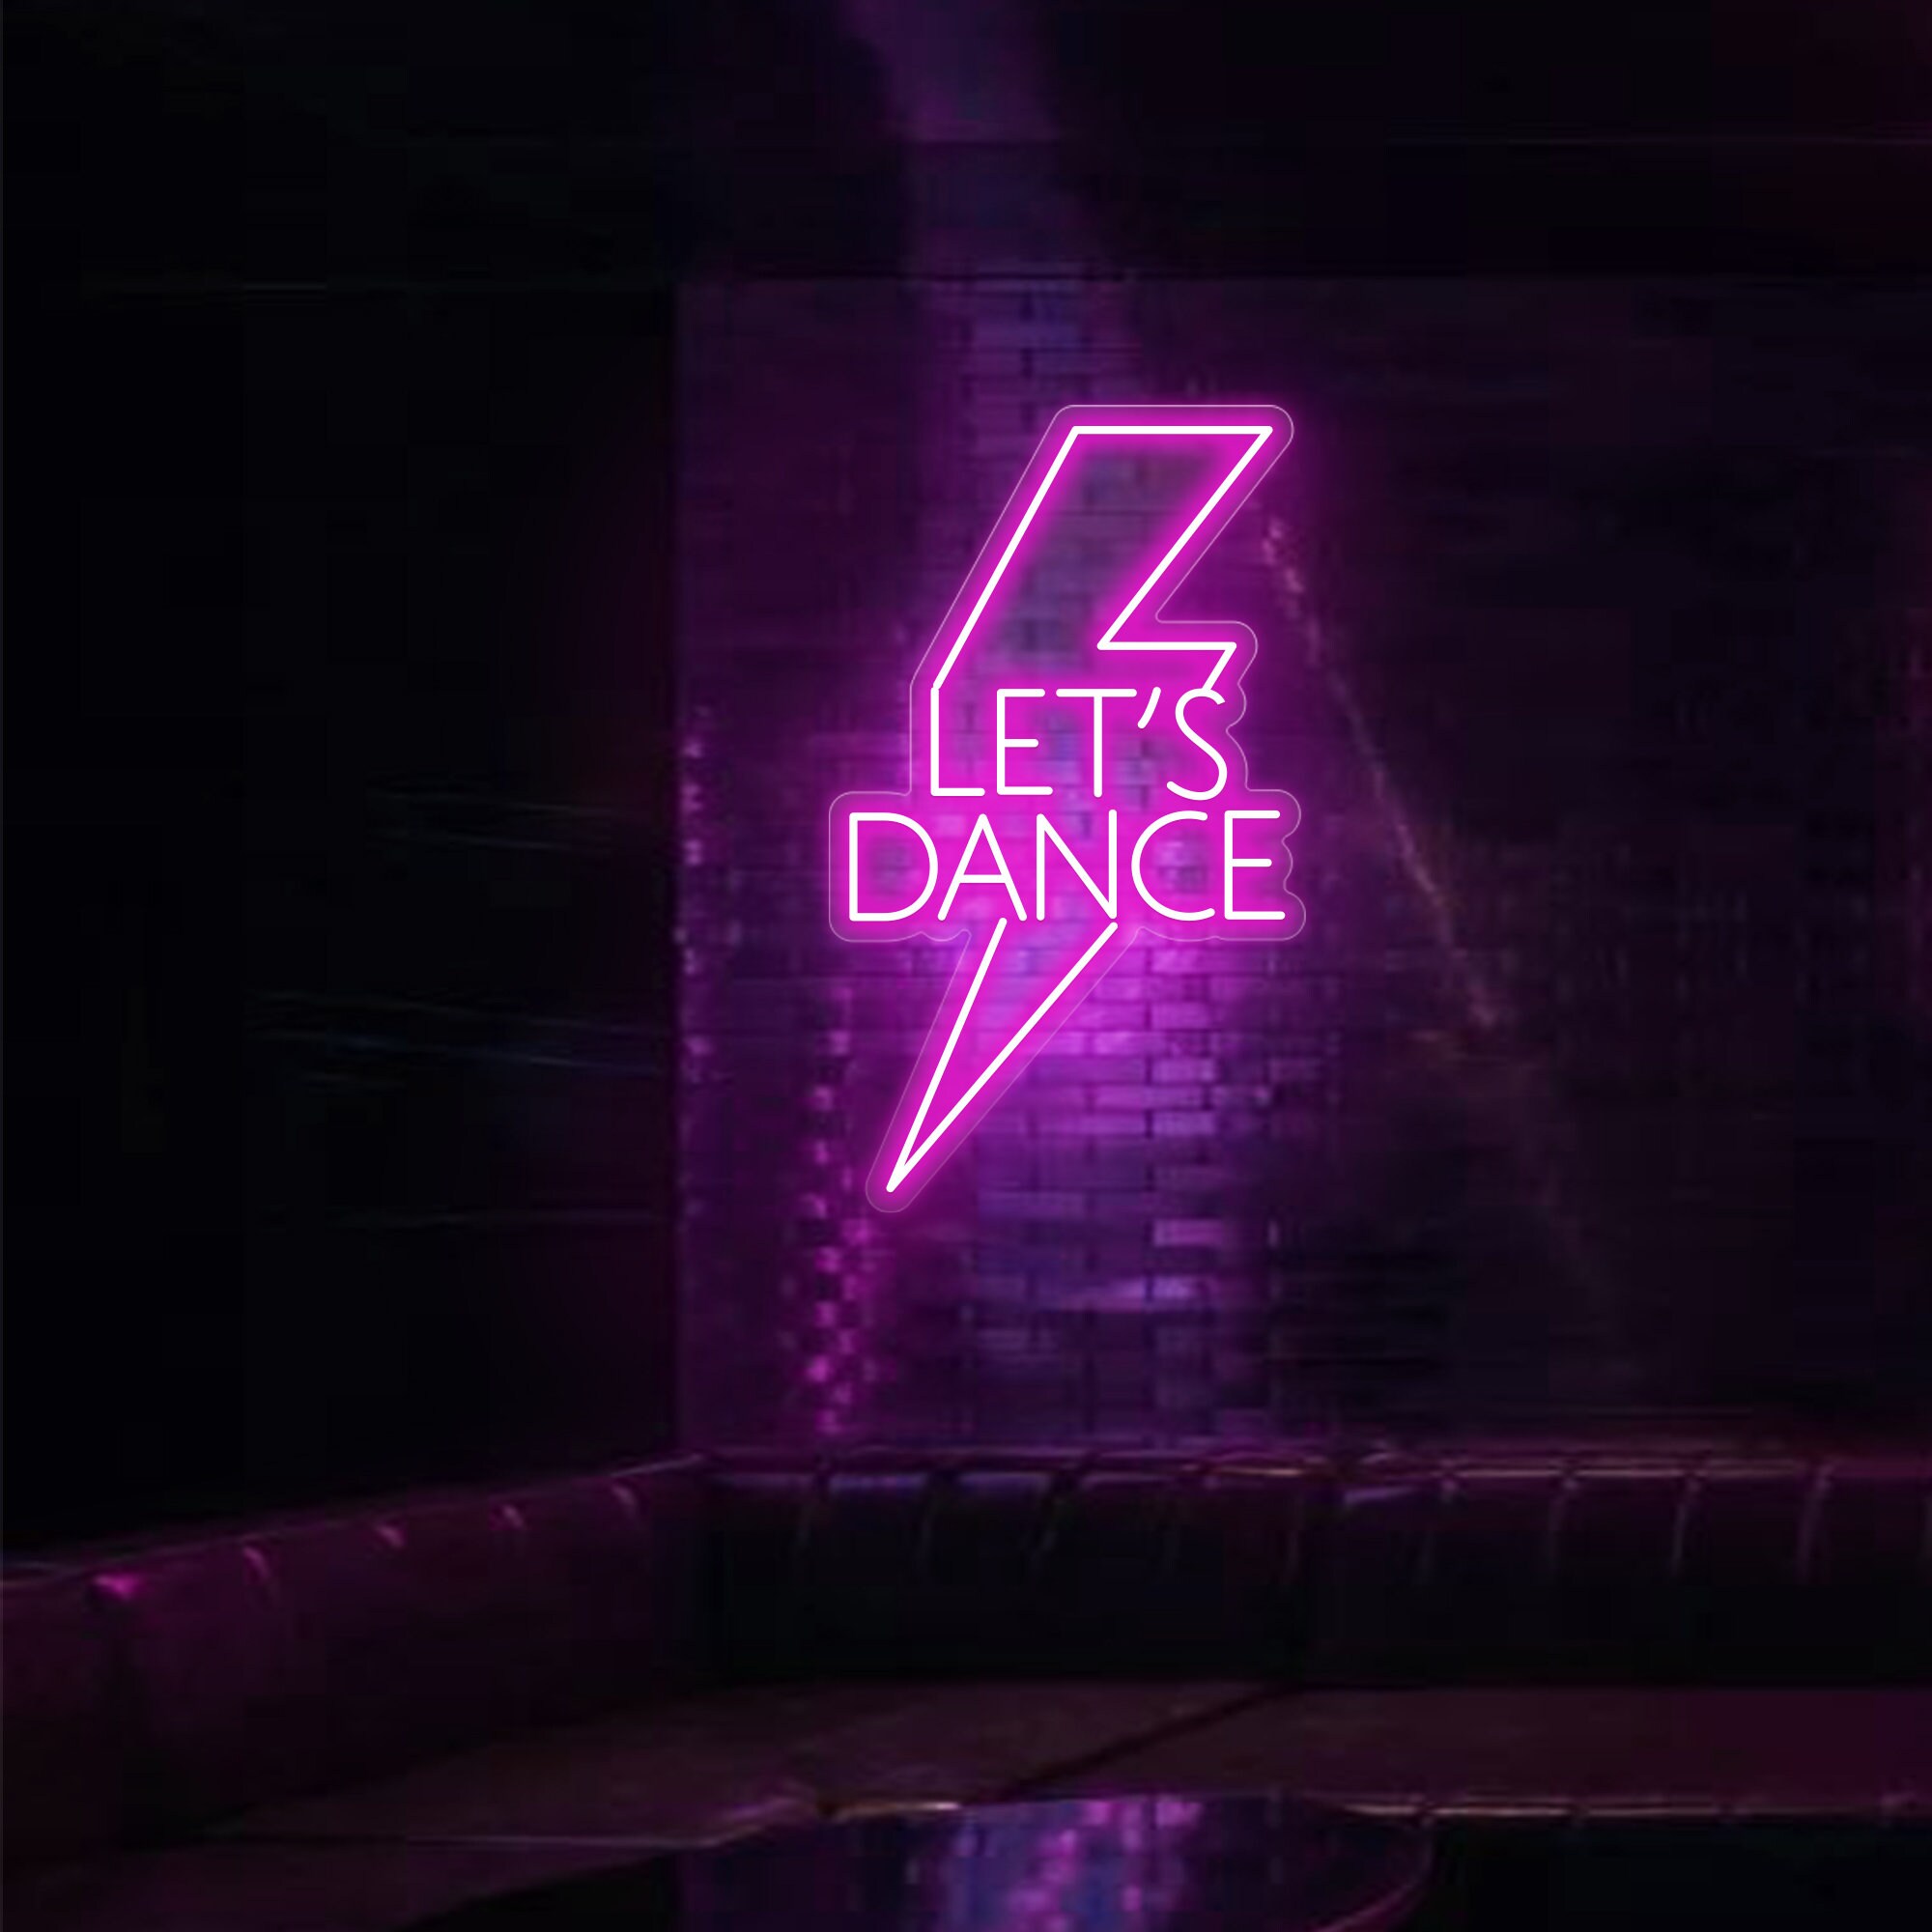 LETS DANCE With Lightning Neon Sign for Neon Wall Decor | Etsy